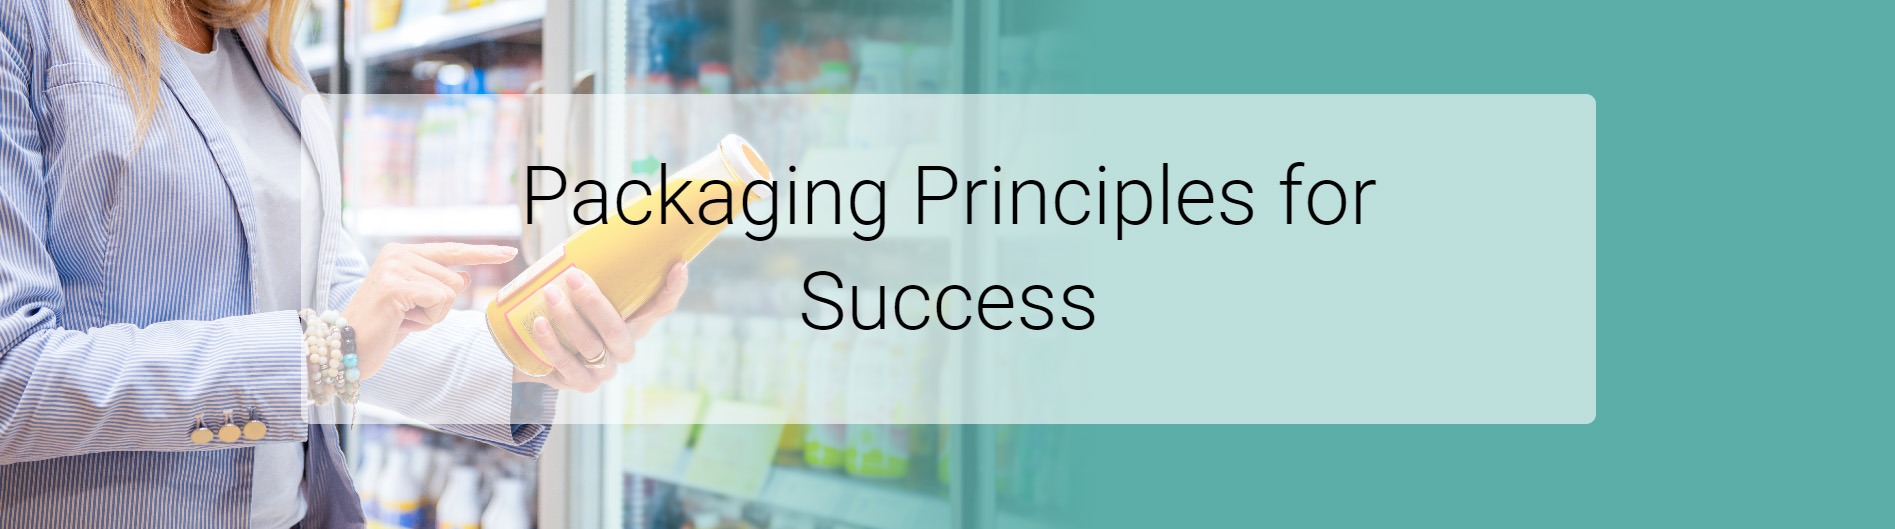 Packaging Principles for Success